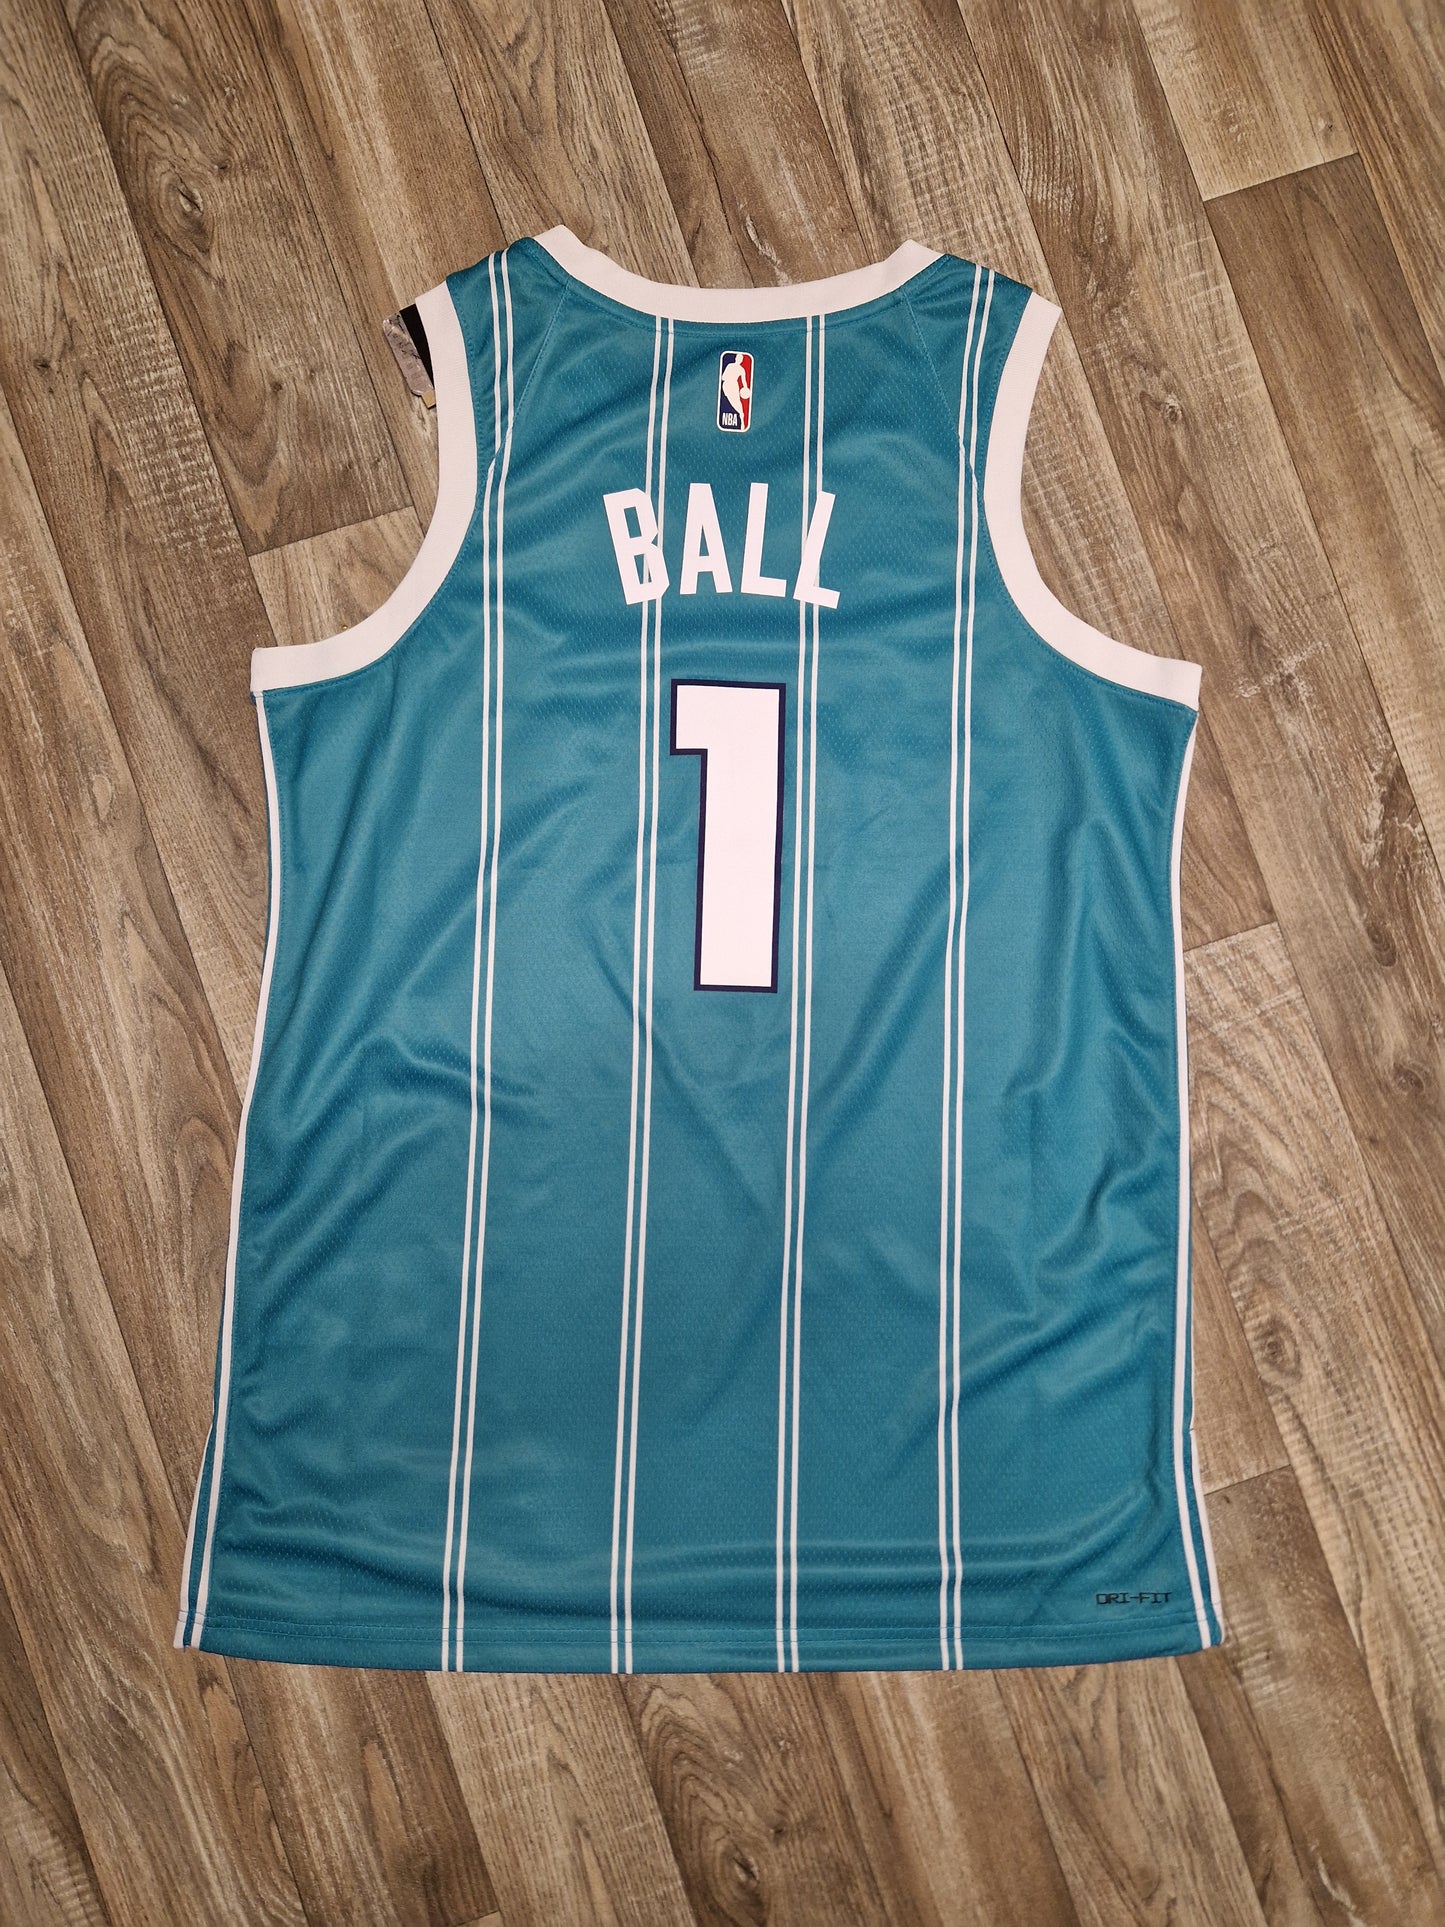 LaMelo Ball Charlotte Hornets Jersey Size Large